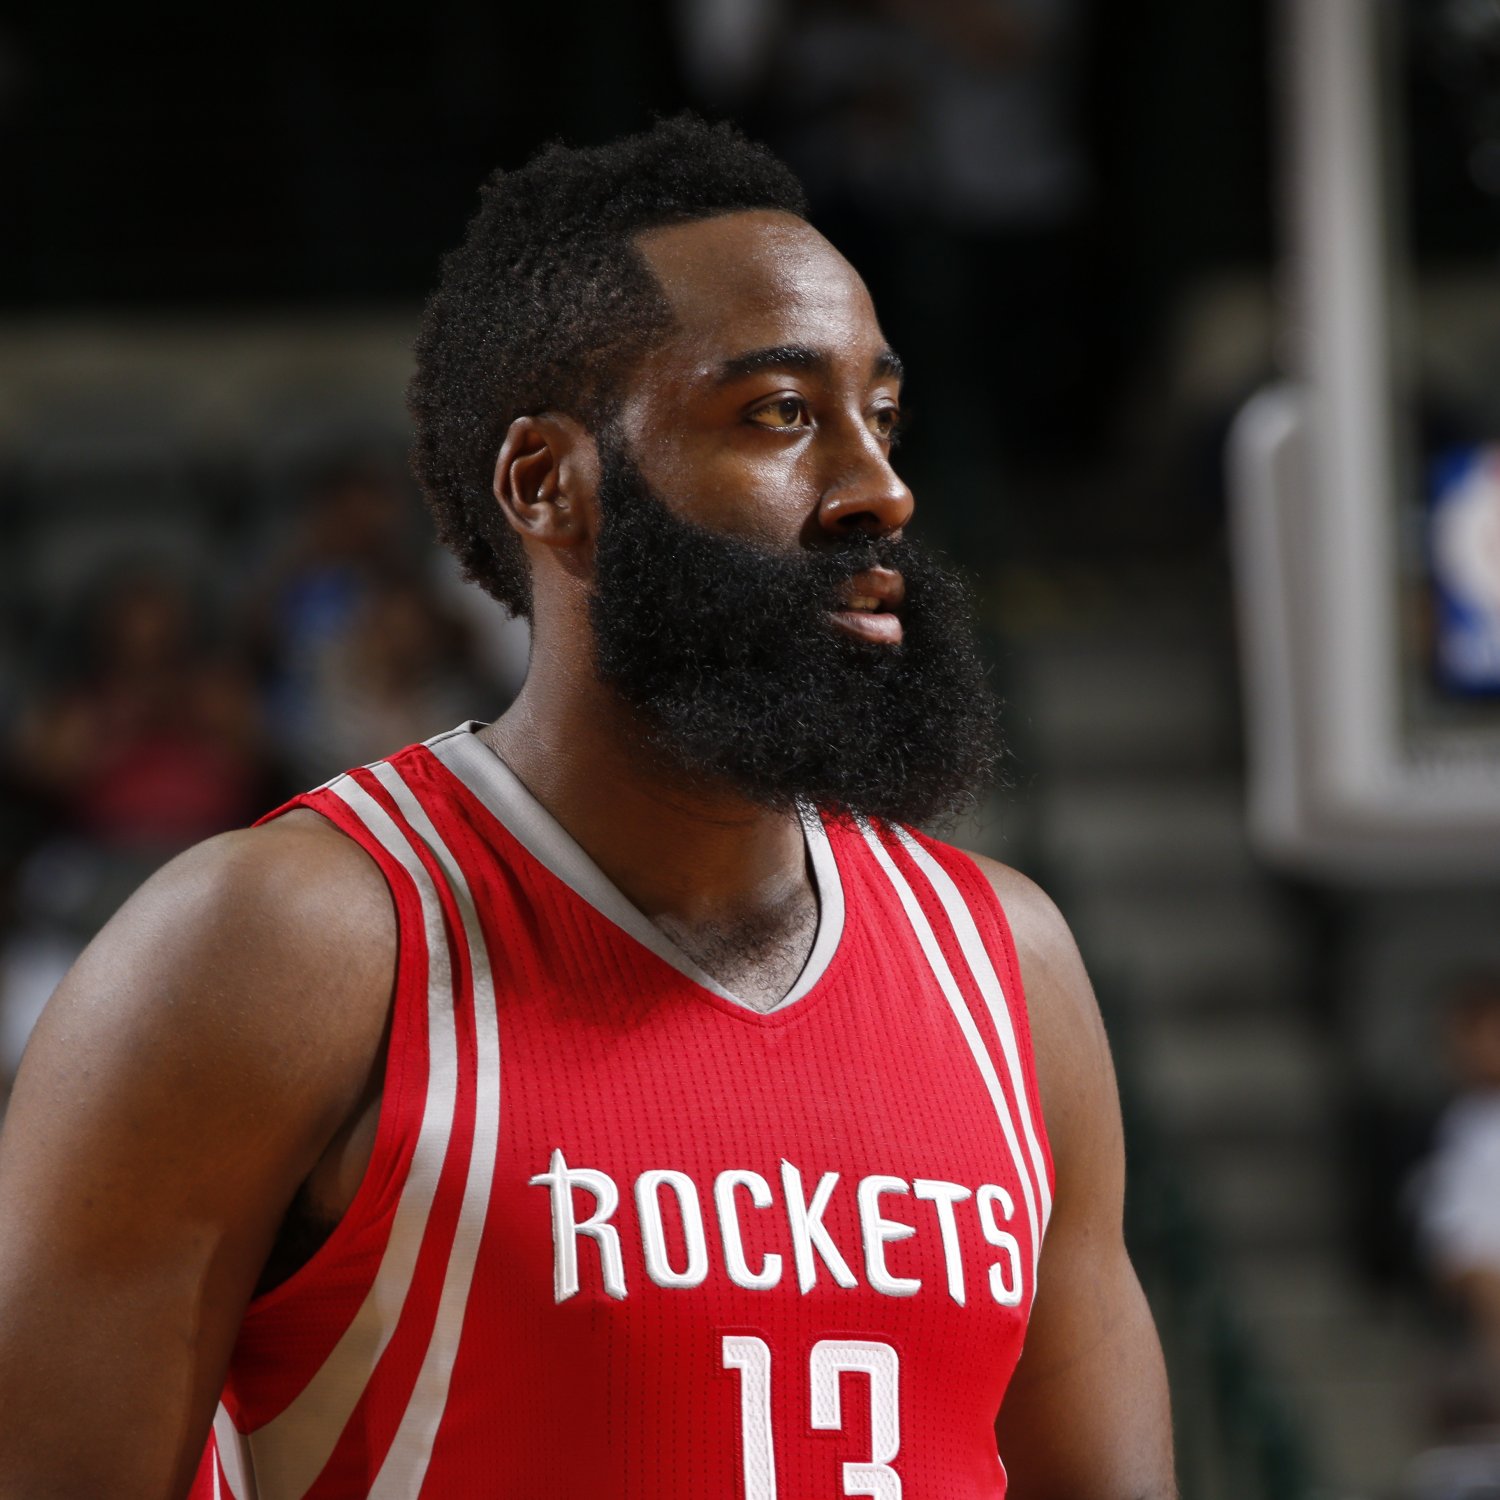 Houston Rockets vs. Los Angeles Lakers: Live Score, Highlights and Reaction